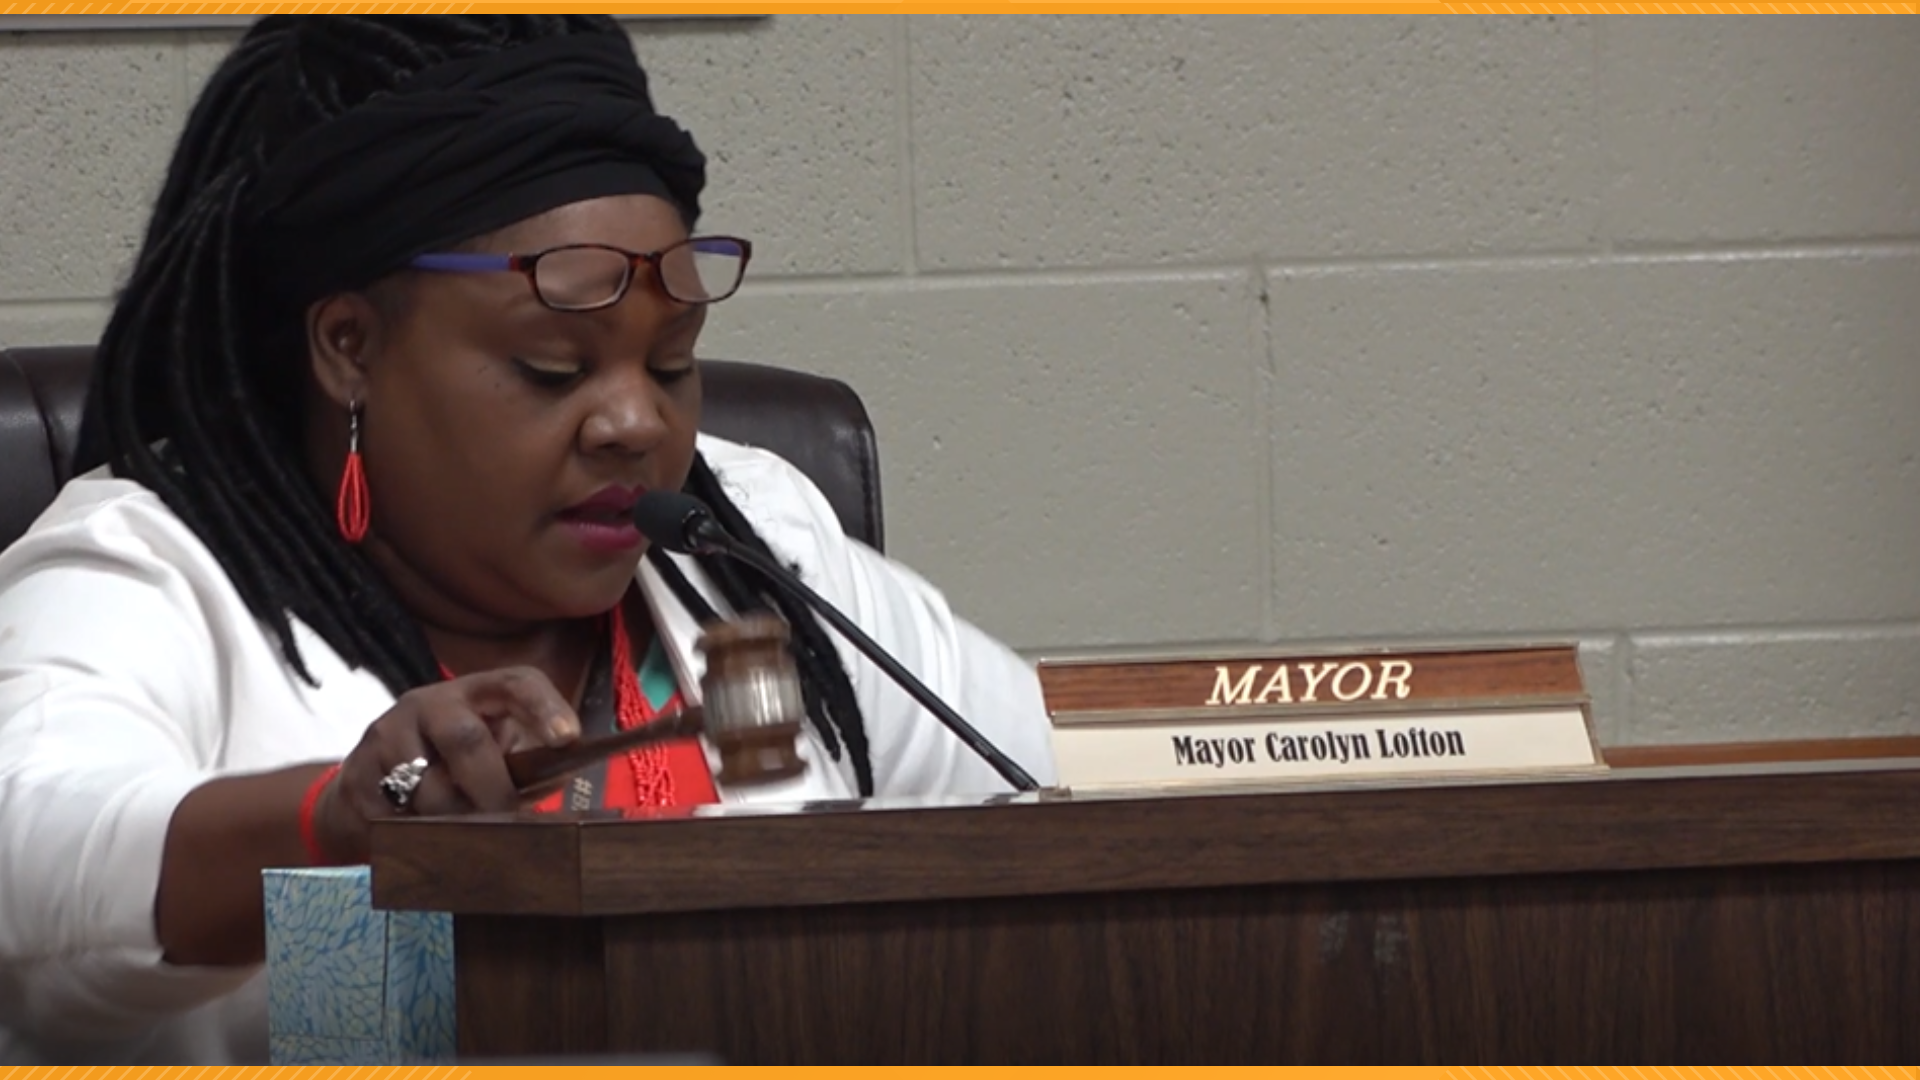 The City was incorporated in 1851 but there wasn't a black mayor until May of 2019.